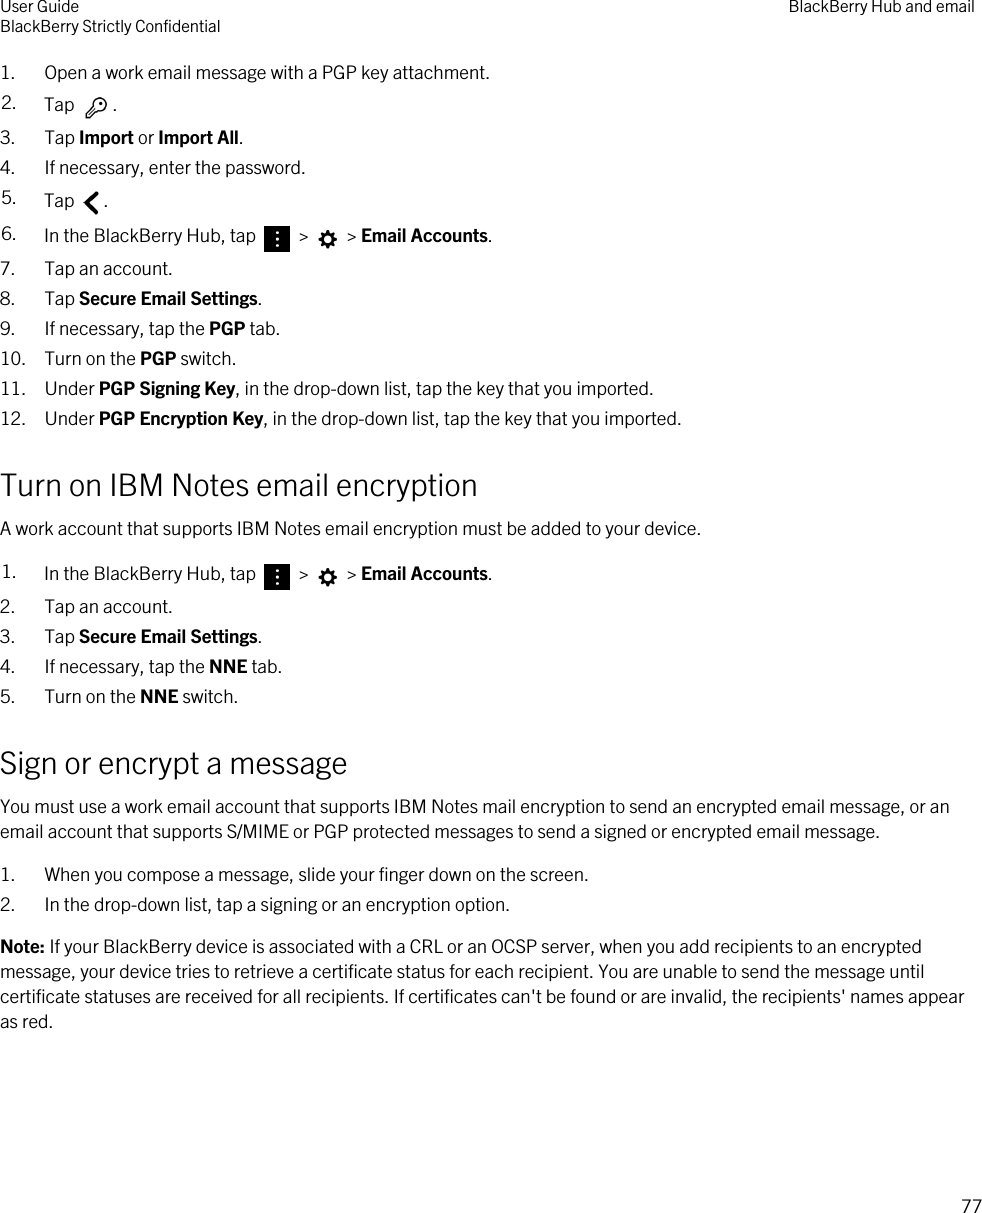 1. Open a work email message with a PGP key attachment.2. Tap  . 3. Tap Import or Import All.4. If necessary, enter the password.5. Tap  .6. In the BlackBerry Hub, tap   &gt;   &gt; Email Accounts.7. Tap an account.8. Tap Secure Email Settings.9. If necessary, tap the PGP tab.10. Turn on the PGP switch.11. Under PGP Signing Key, in the drop-down list, tap the key that you imported.12. Under PGP Encryption Key, in the drop-down list, tap the key that you imported.Turn on IBM Notes email encryptionA work account that supports IBM Notes email encryption must be added to your device.1. In the BlackBerry Hub, tap   &gt;   &gt; Email Accounts.2. Tap an account.3. Tap Secure Email Settings.4. If necessary, tap the NNE tab.5. Turn on the NNE switch.Sign or encrypt a messageYou must use a work email account that supports IBM Notes mail encryption to send an encrypted email message, or an email account that supports S/MIME or PGP protected messages to send a signed or encrypted email message.1. When you compose a message, slide your finger down on the screen.2. In the drop-down list, tap a signing or an encryption option.Note: If your BlackBerry device is associated with a CRL or an OCSP server, when you add recipients to an encrypted message, your device tries to retrieve a certificate status for each recipient. You are unable to send the message until certificate statuses are received for all recipients. If certificates can&apos;t be found or are invalid, the recipients&apos; names appear as red.User GuideBlackBerry Strictly Confidential BlackBerry Hub and email77